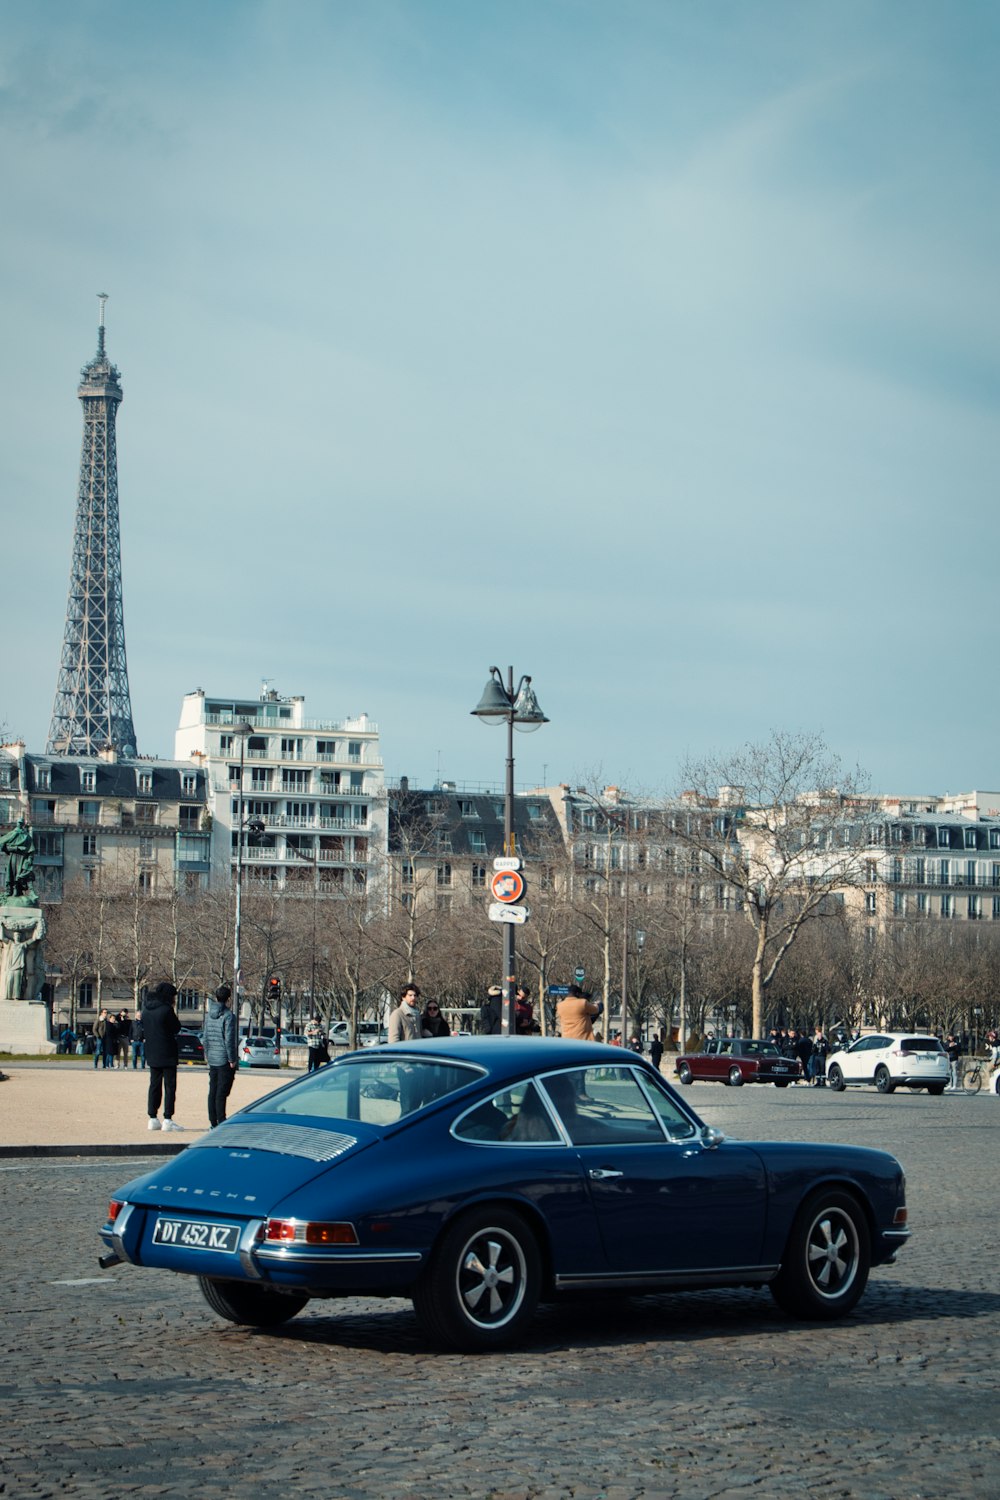 a blue car parked in front of the eiffel tower